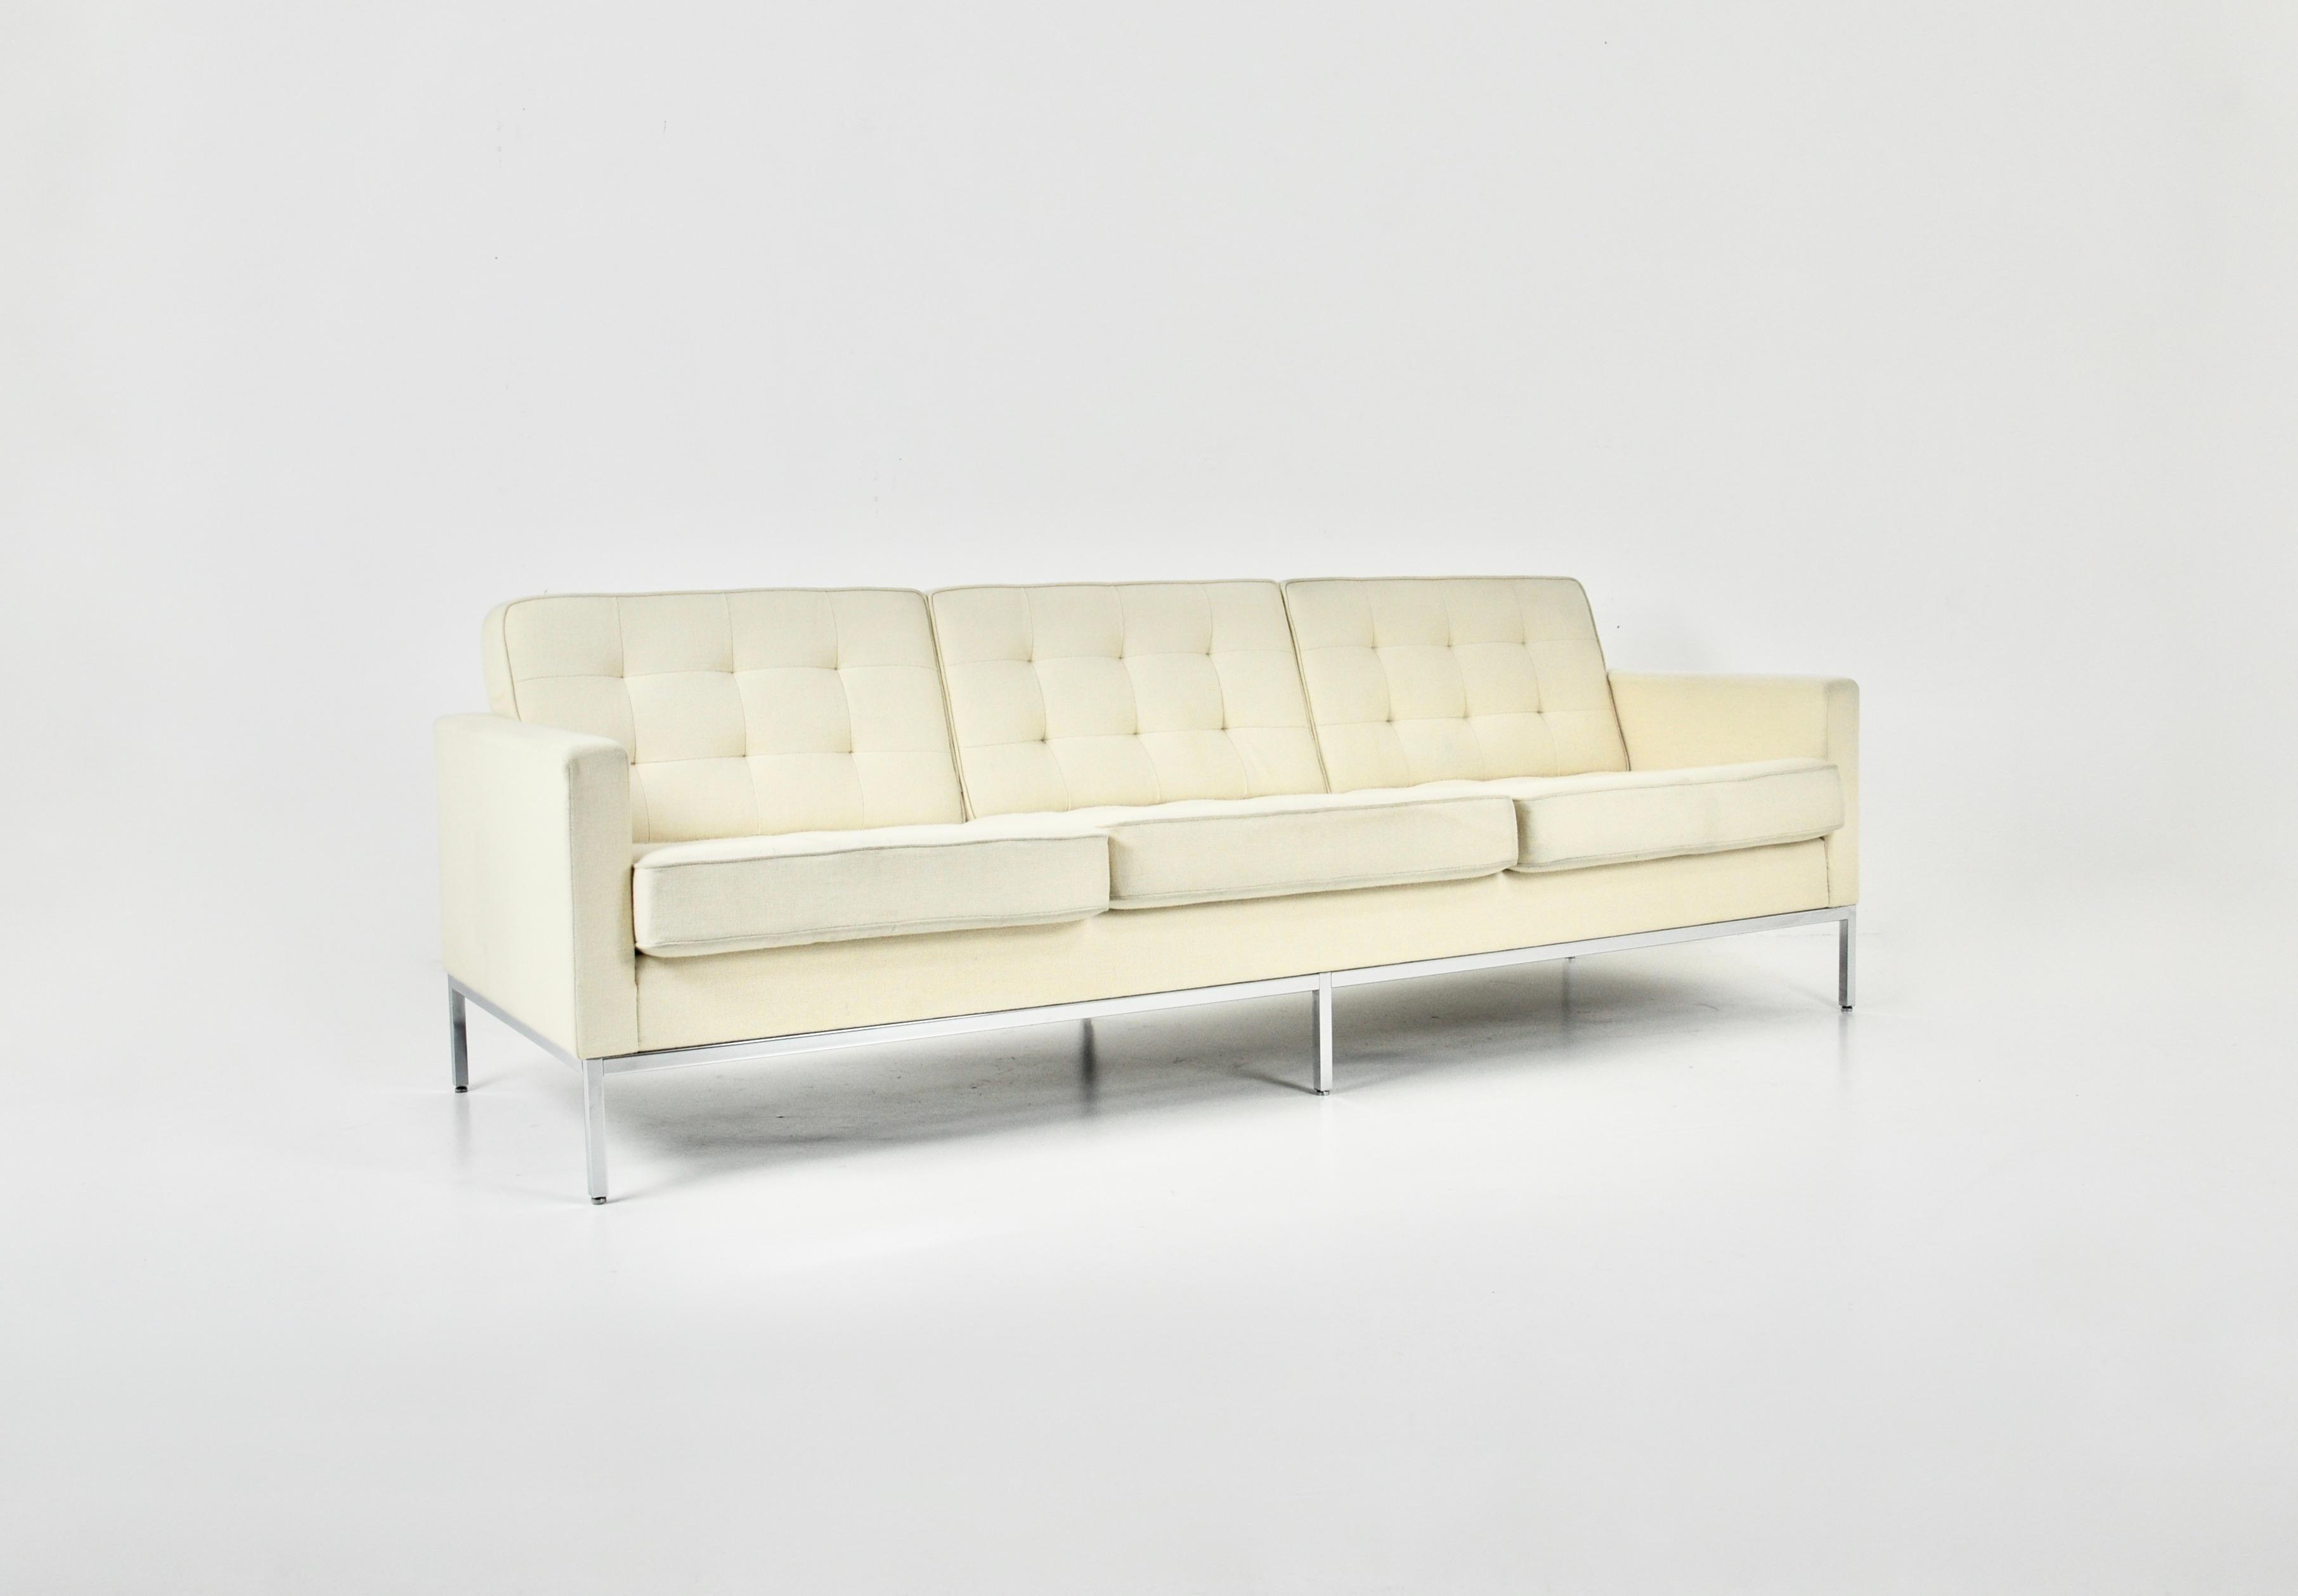 Creamy white fabric sofa. Stamped Knoll on one leg. Seat height: 46 cm. Wear due to time and age.
